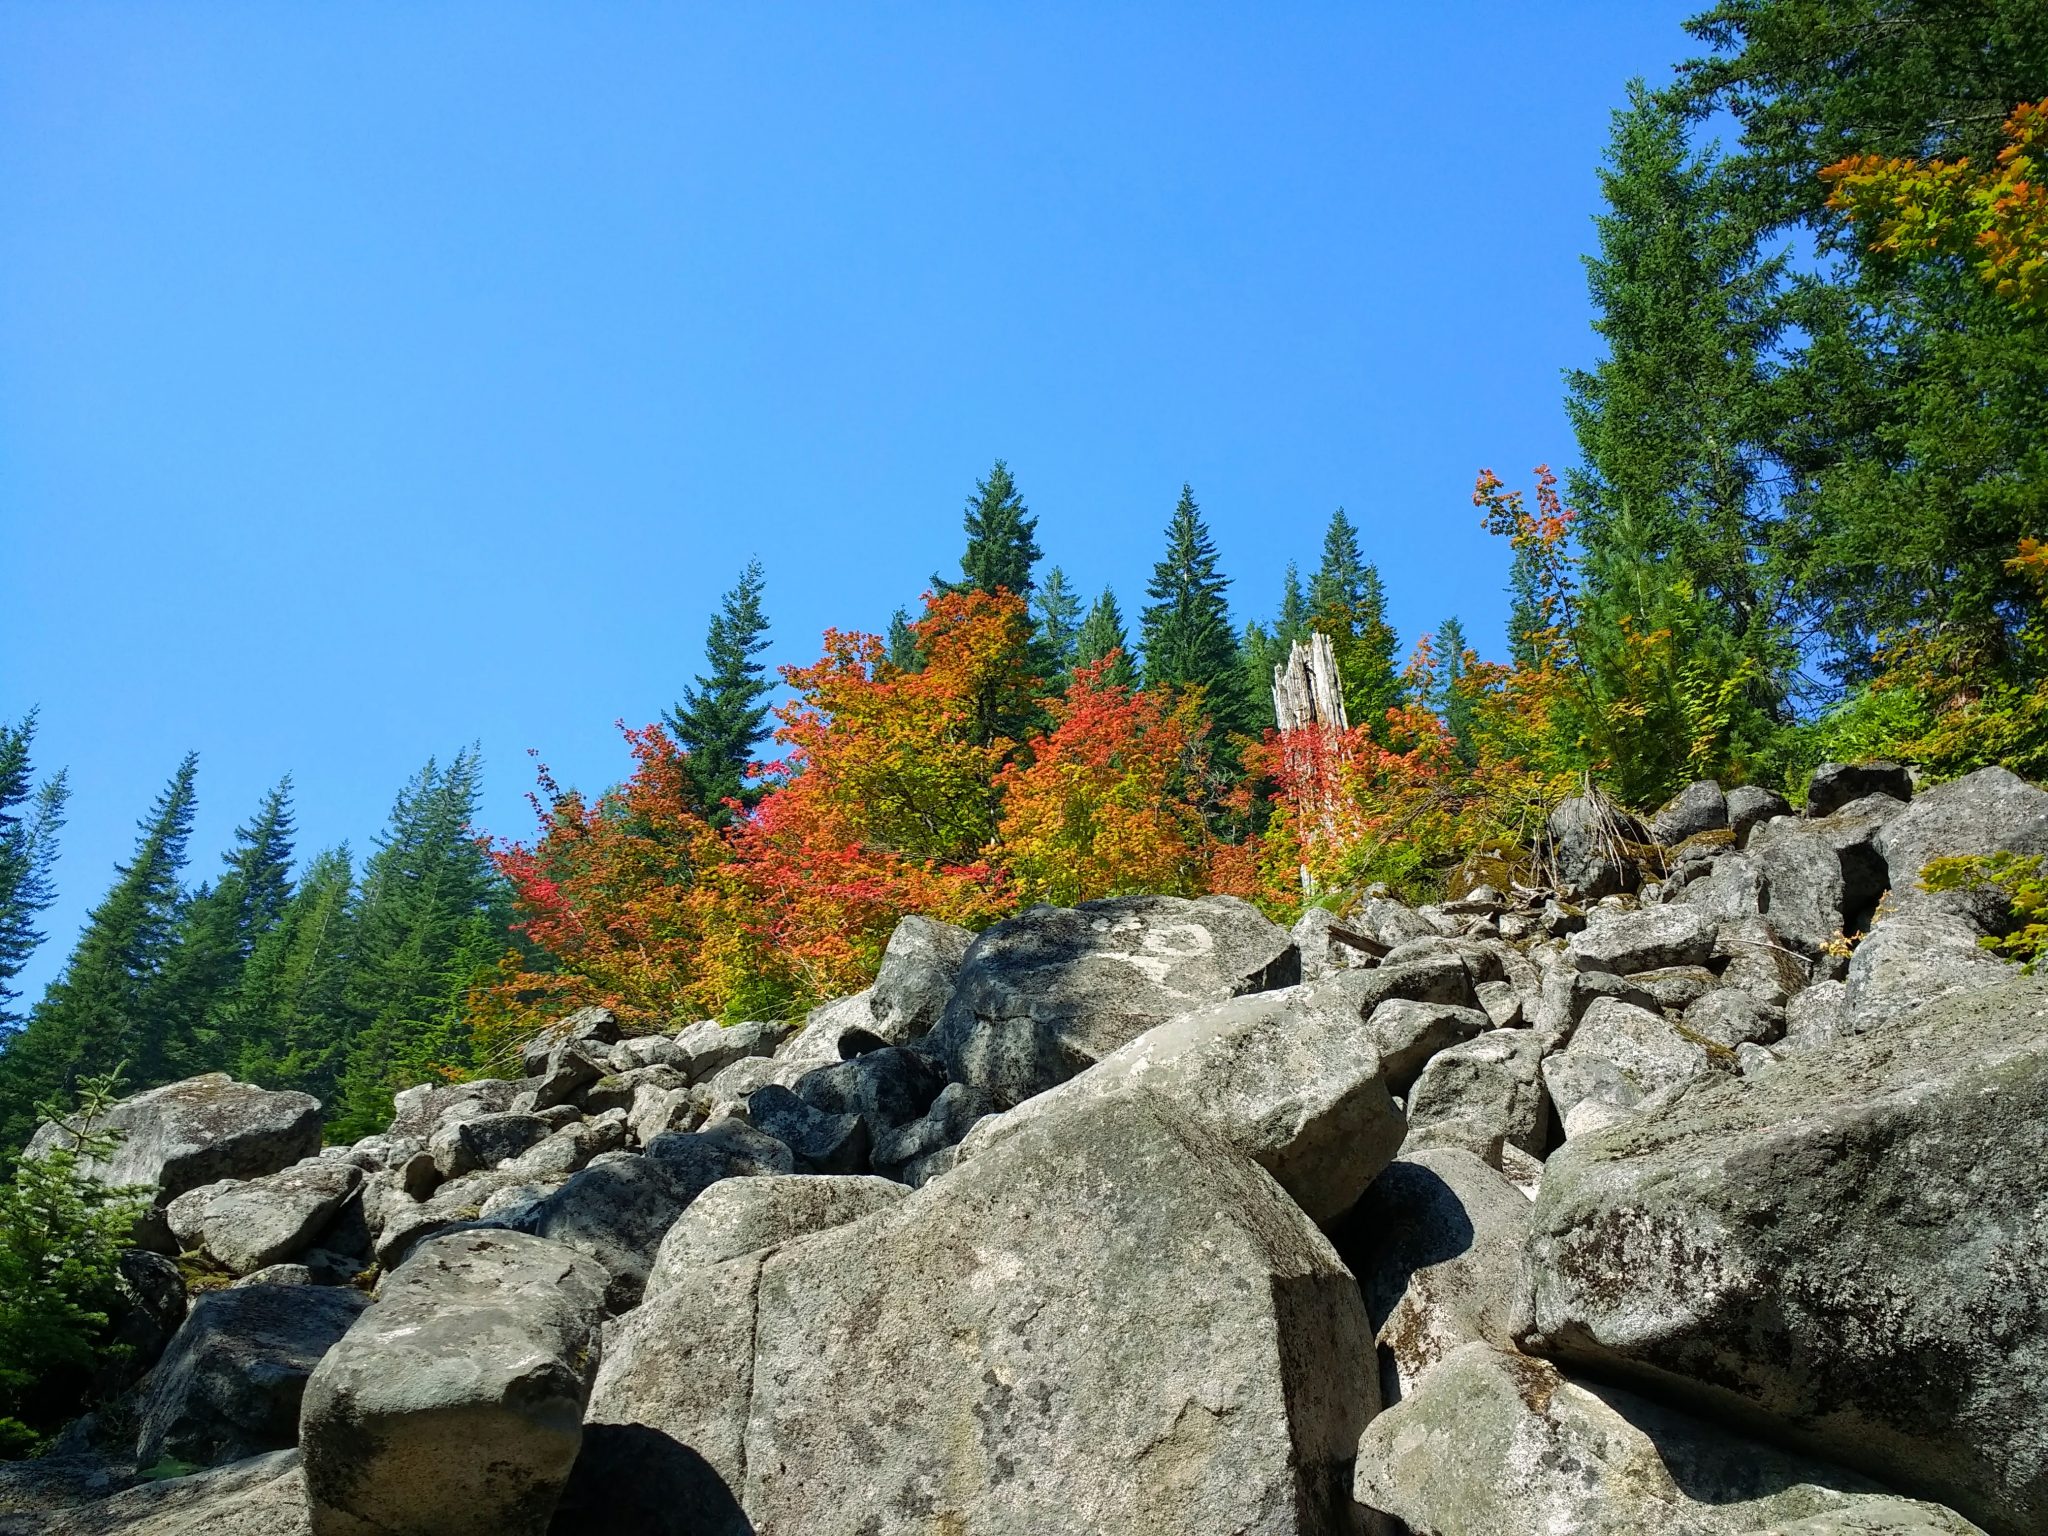 Looking up at a boulder field on the Talapus lake hike, there are fall color shrubs against evergreen trees and a blue sky